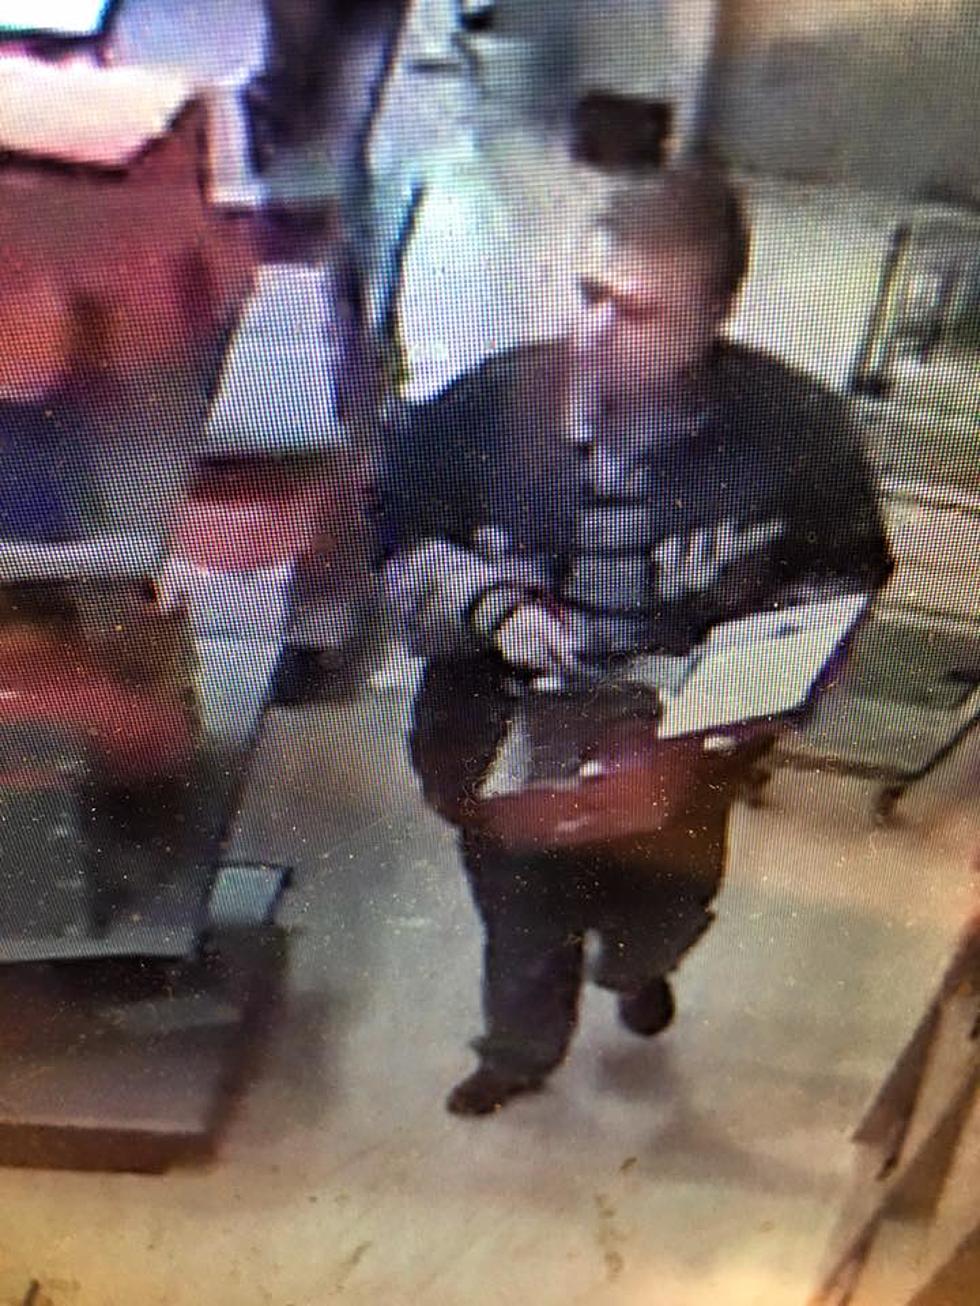 Duluth Police Search For Suspect In Theft Incident At The Mall